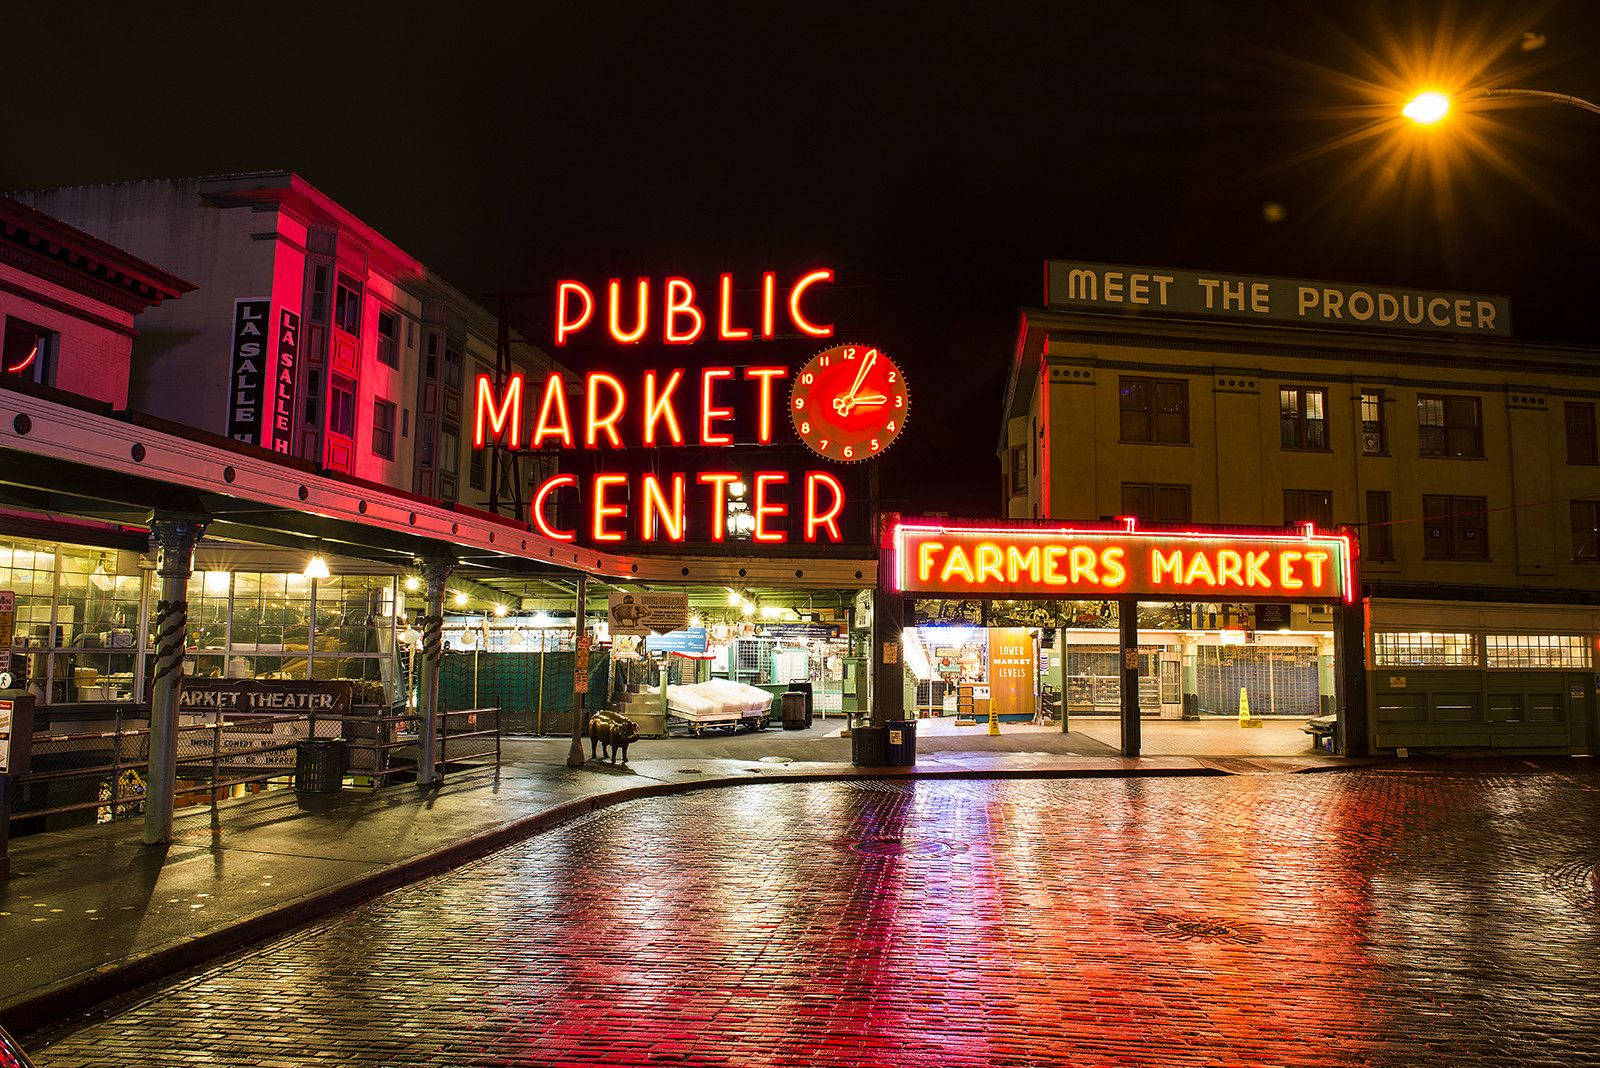 Pikeplace Market Tomt (tom) Wallpaper